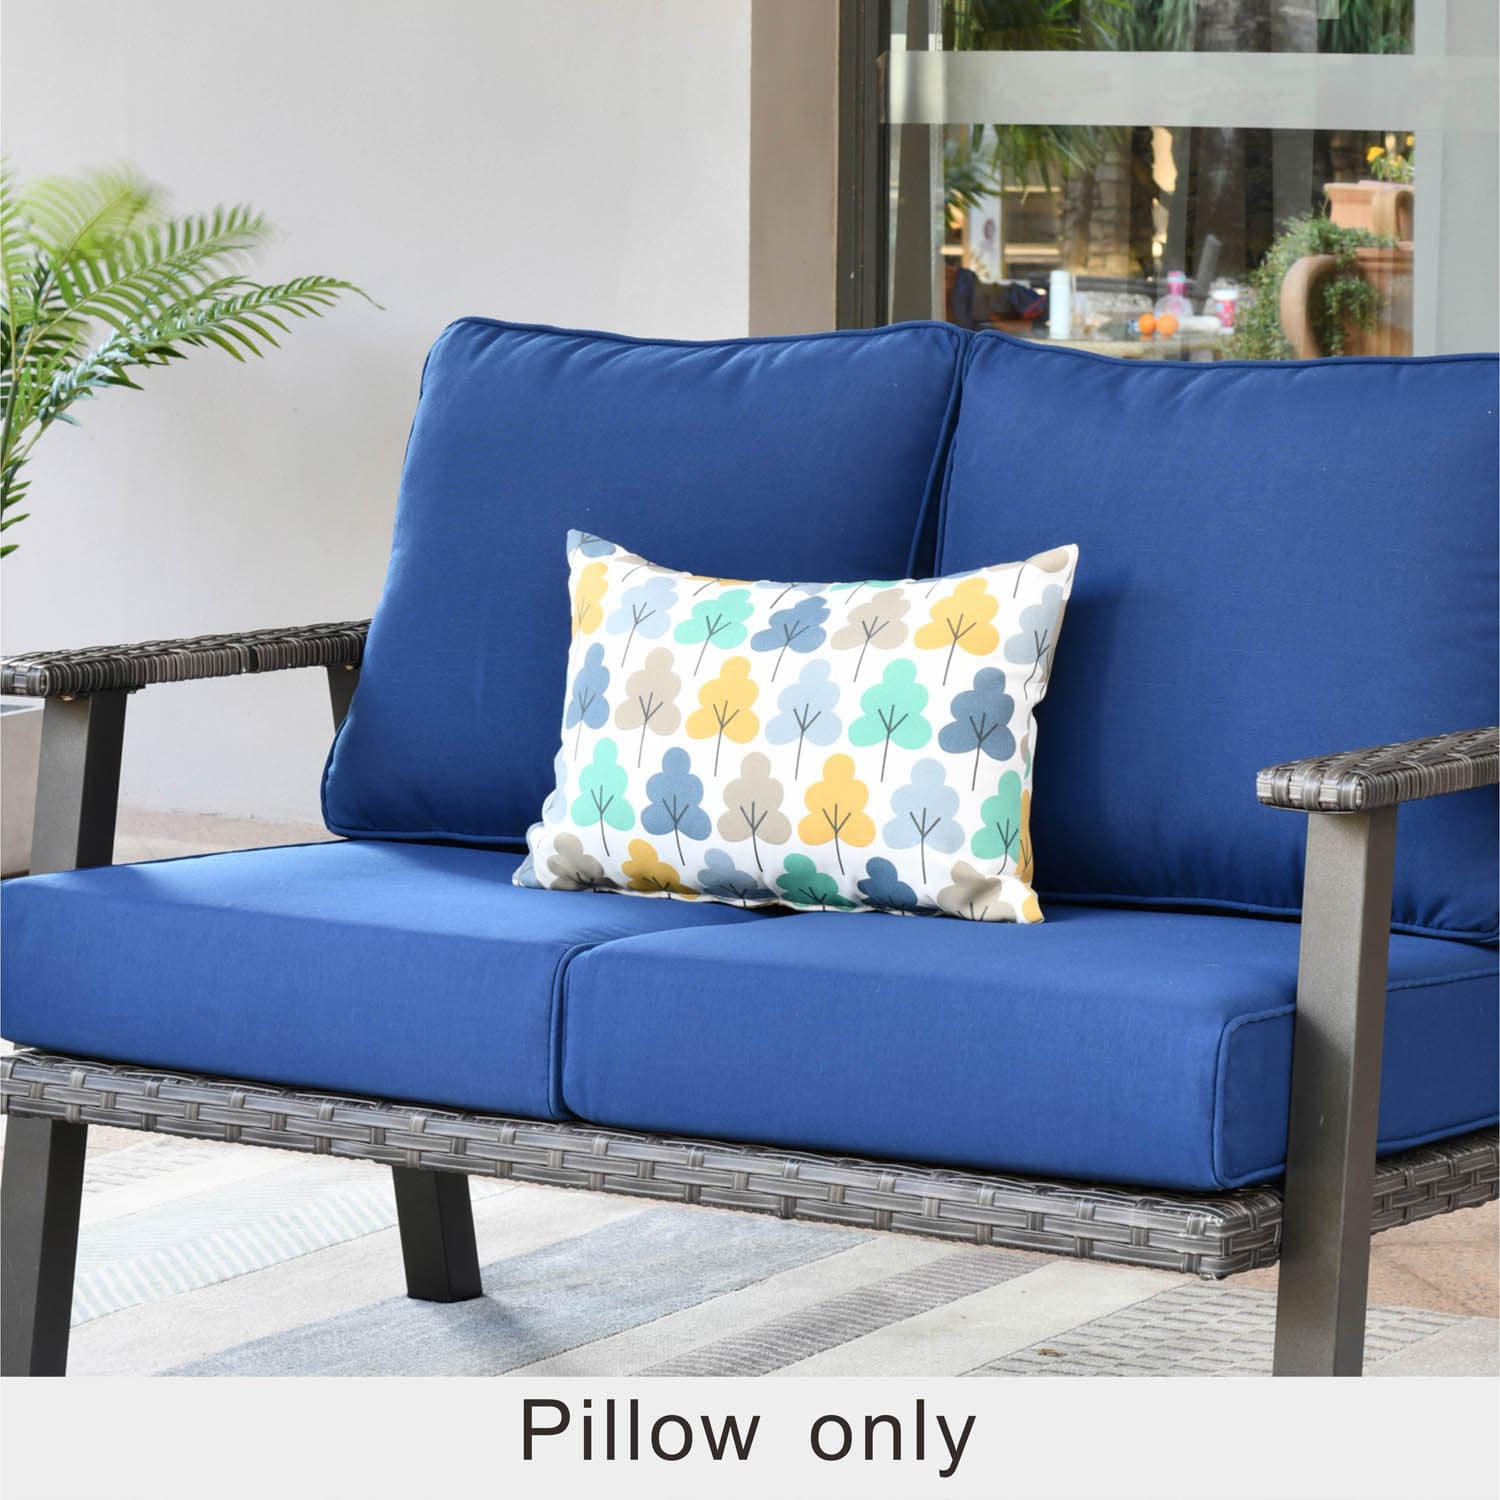 cushion replacement outdoor furniture